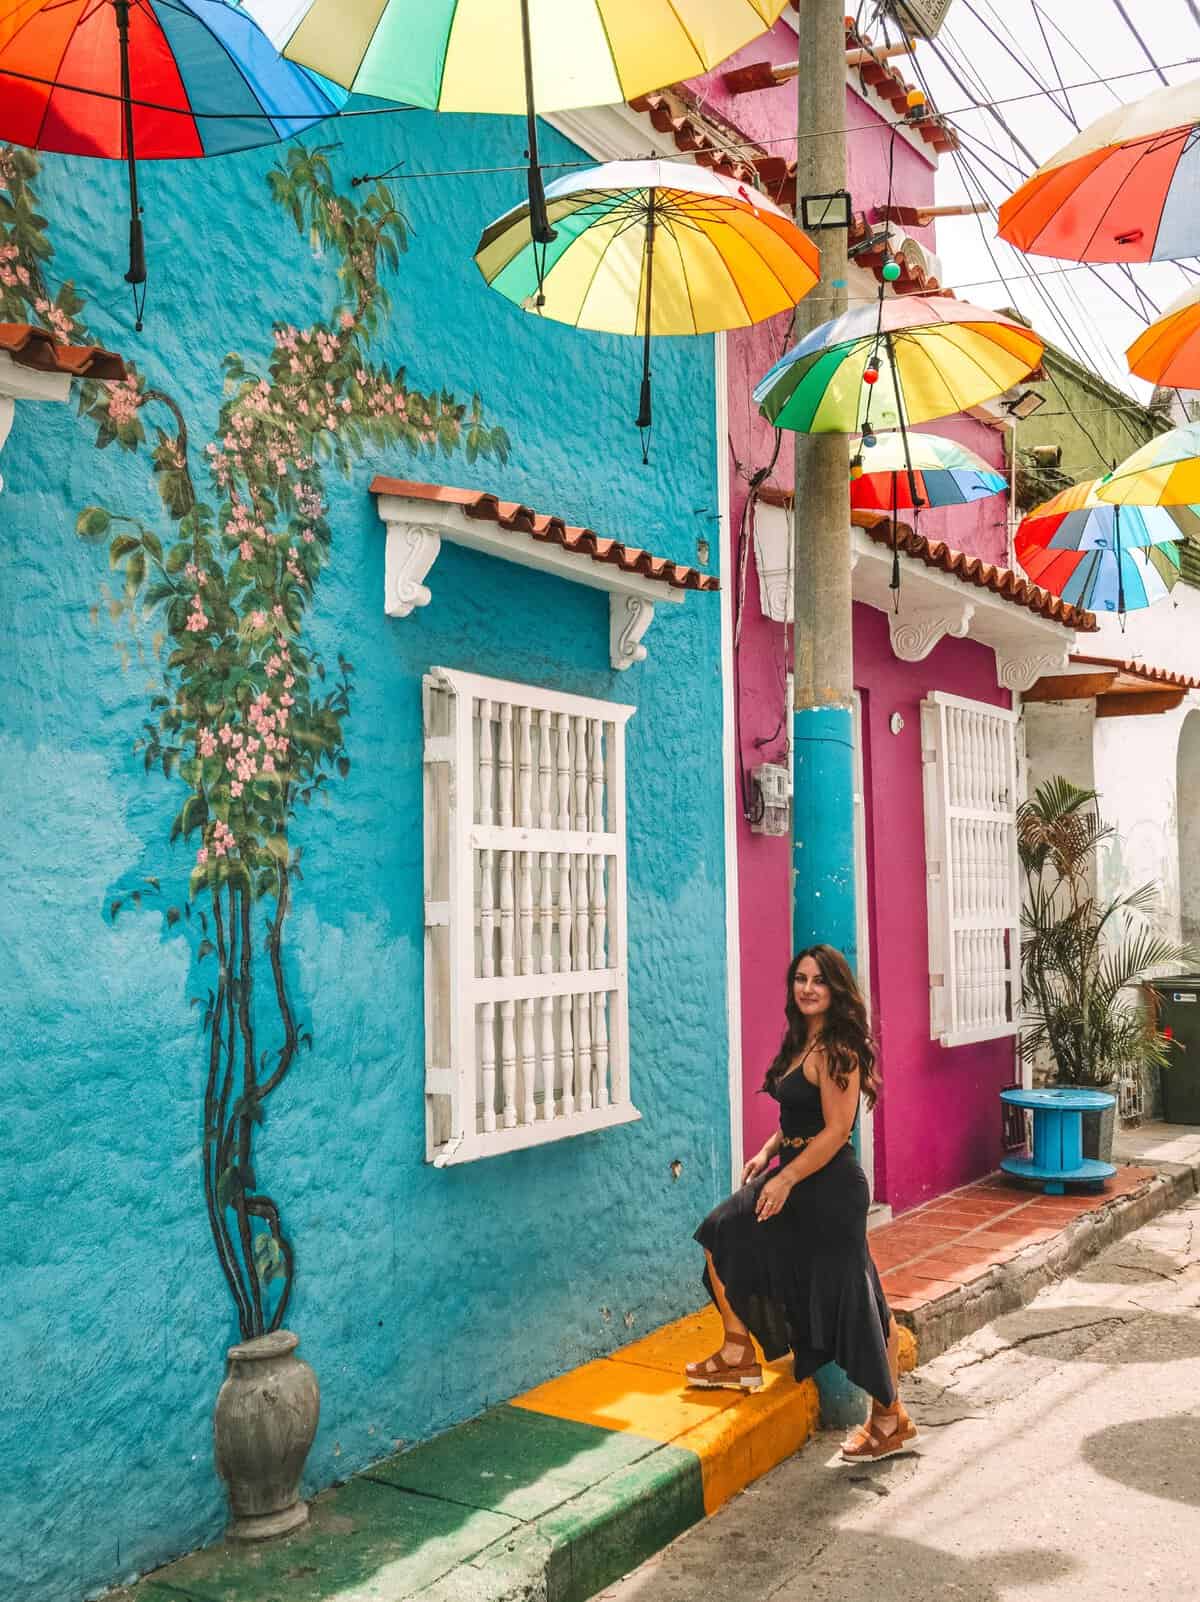 Me next to a colorful blue and pink wall on a street covered with umbrellas in Getsemani.